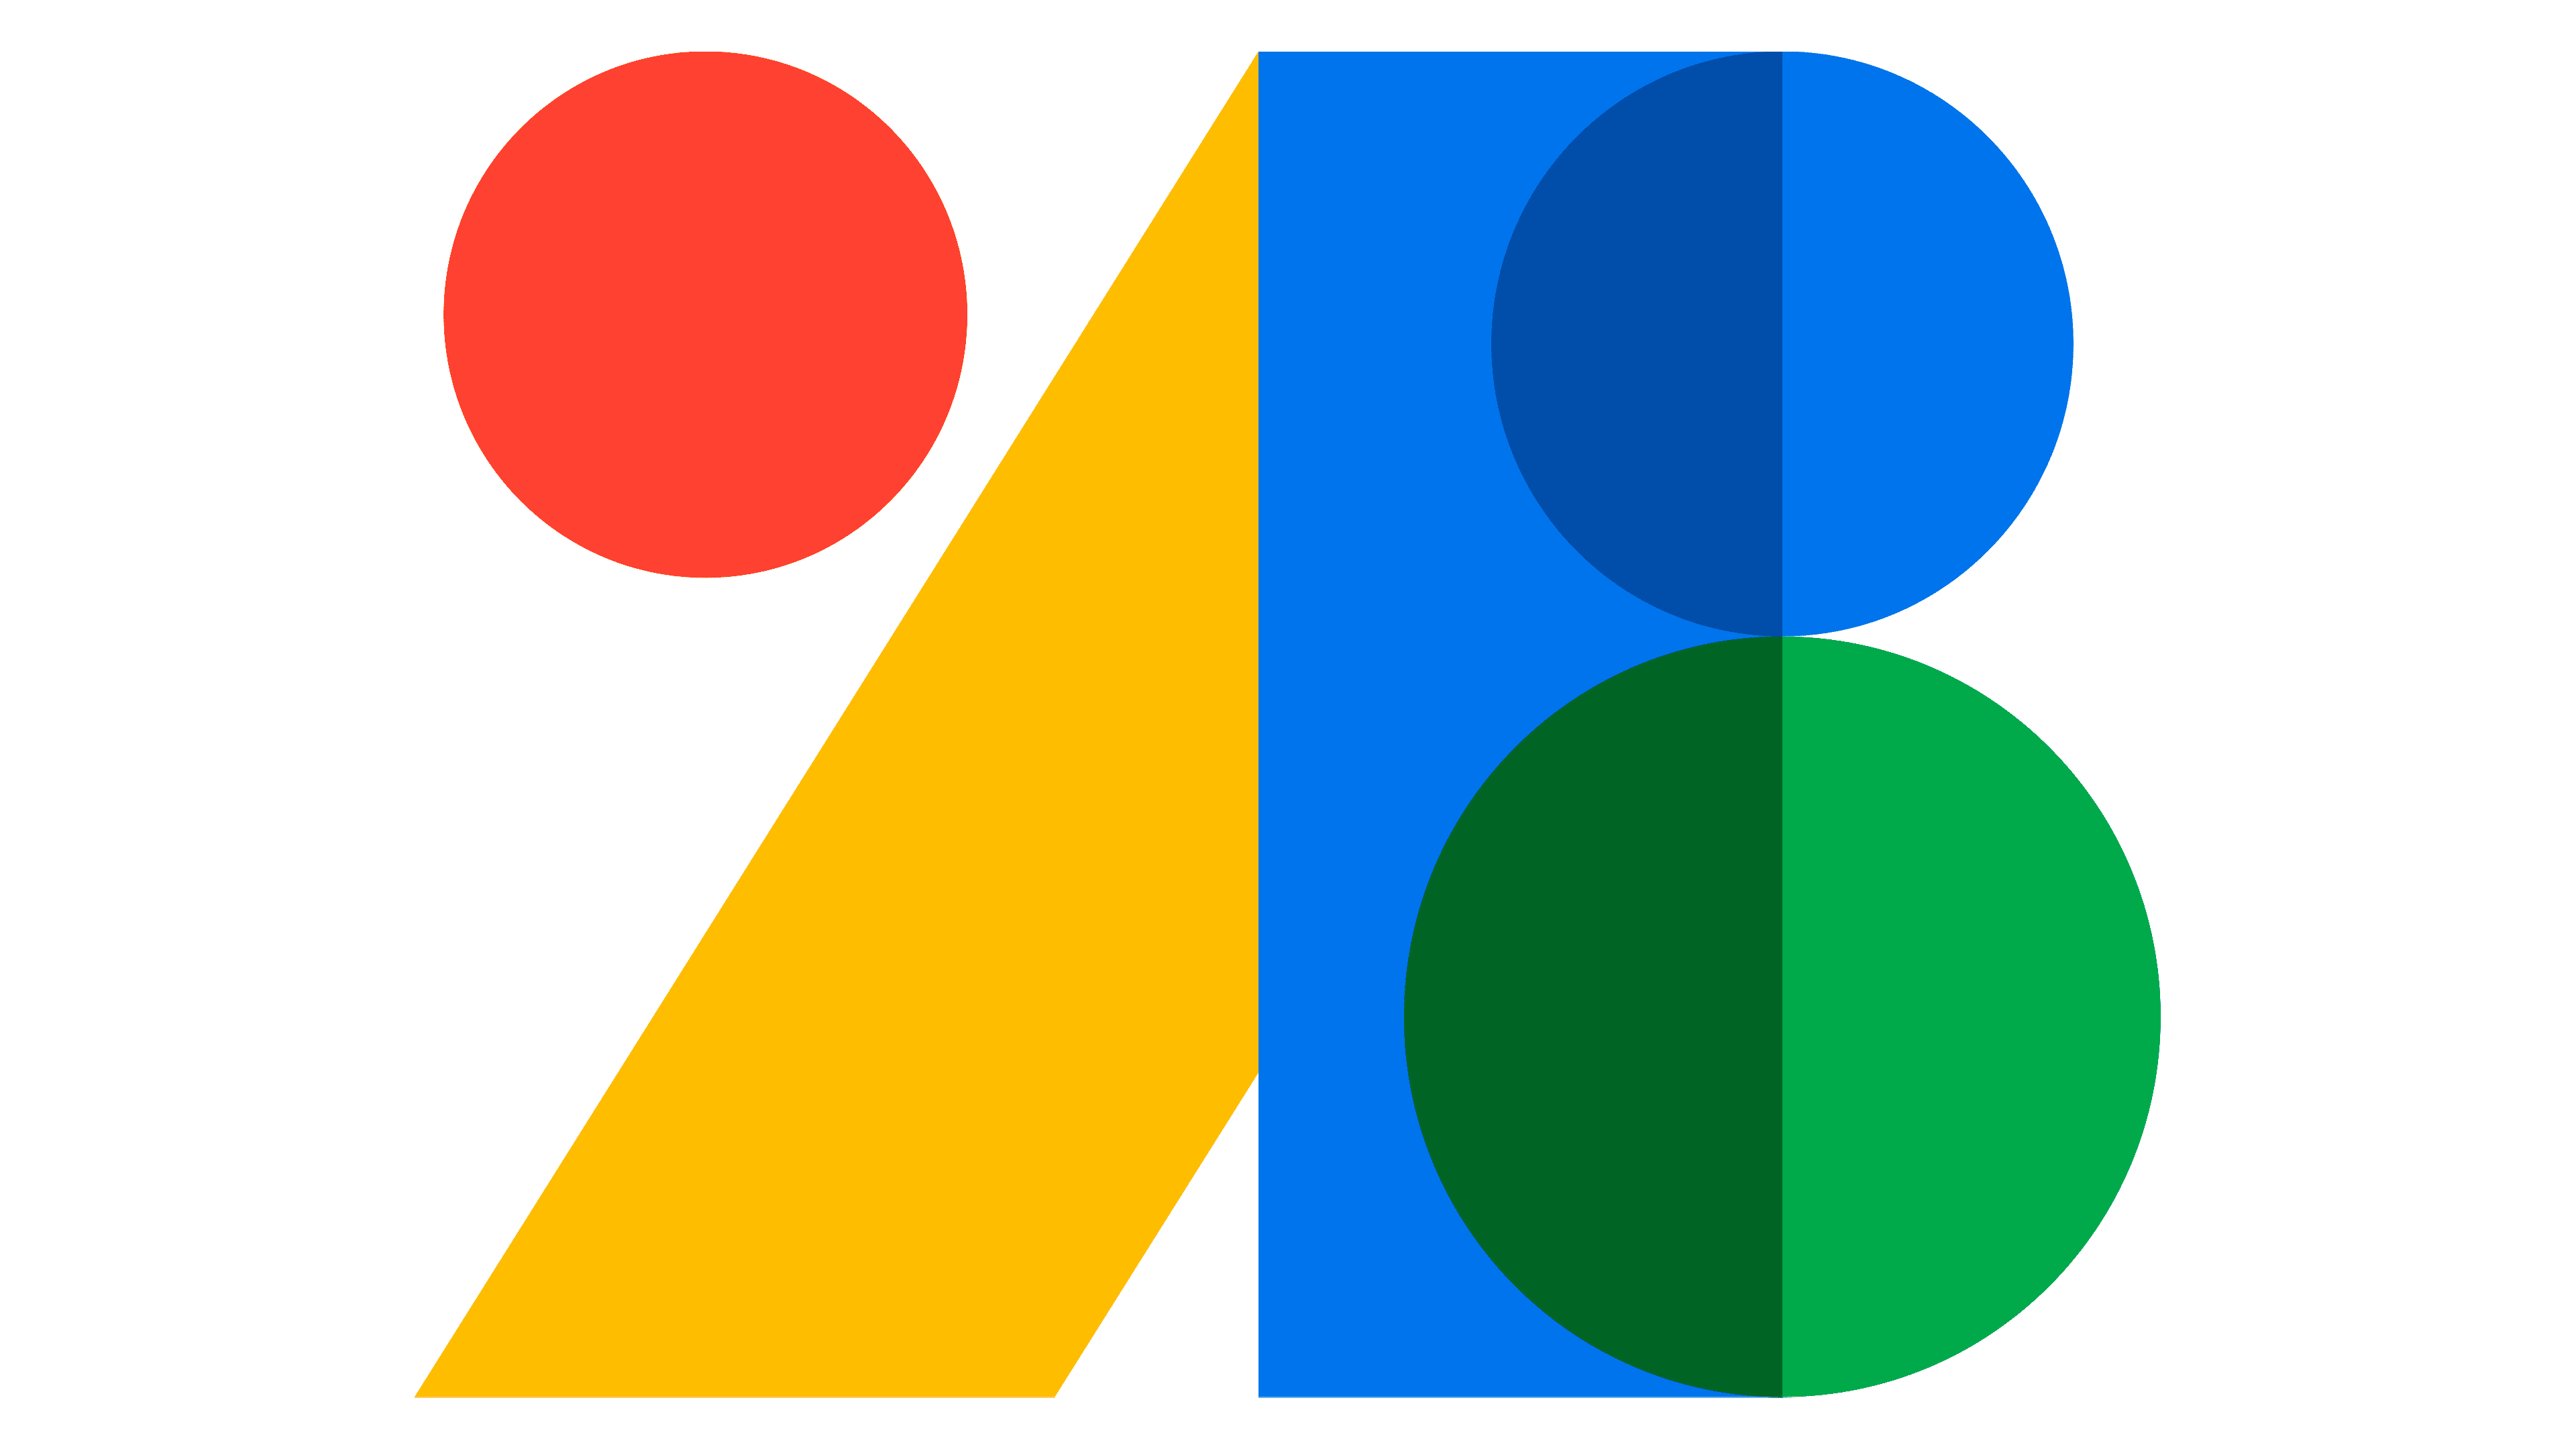 New Google Fonts logo using base colors and new elements